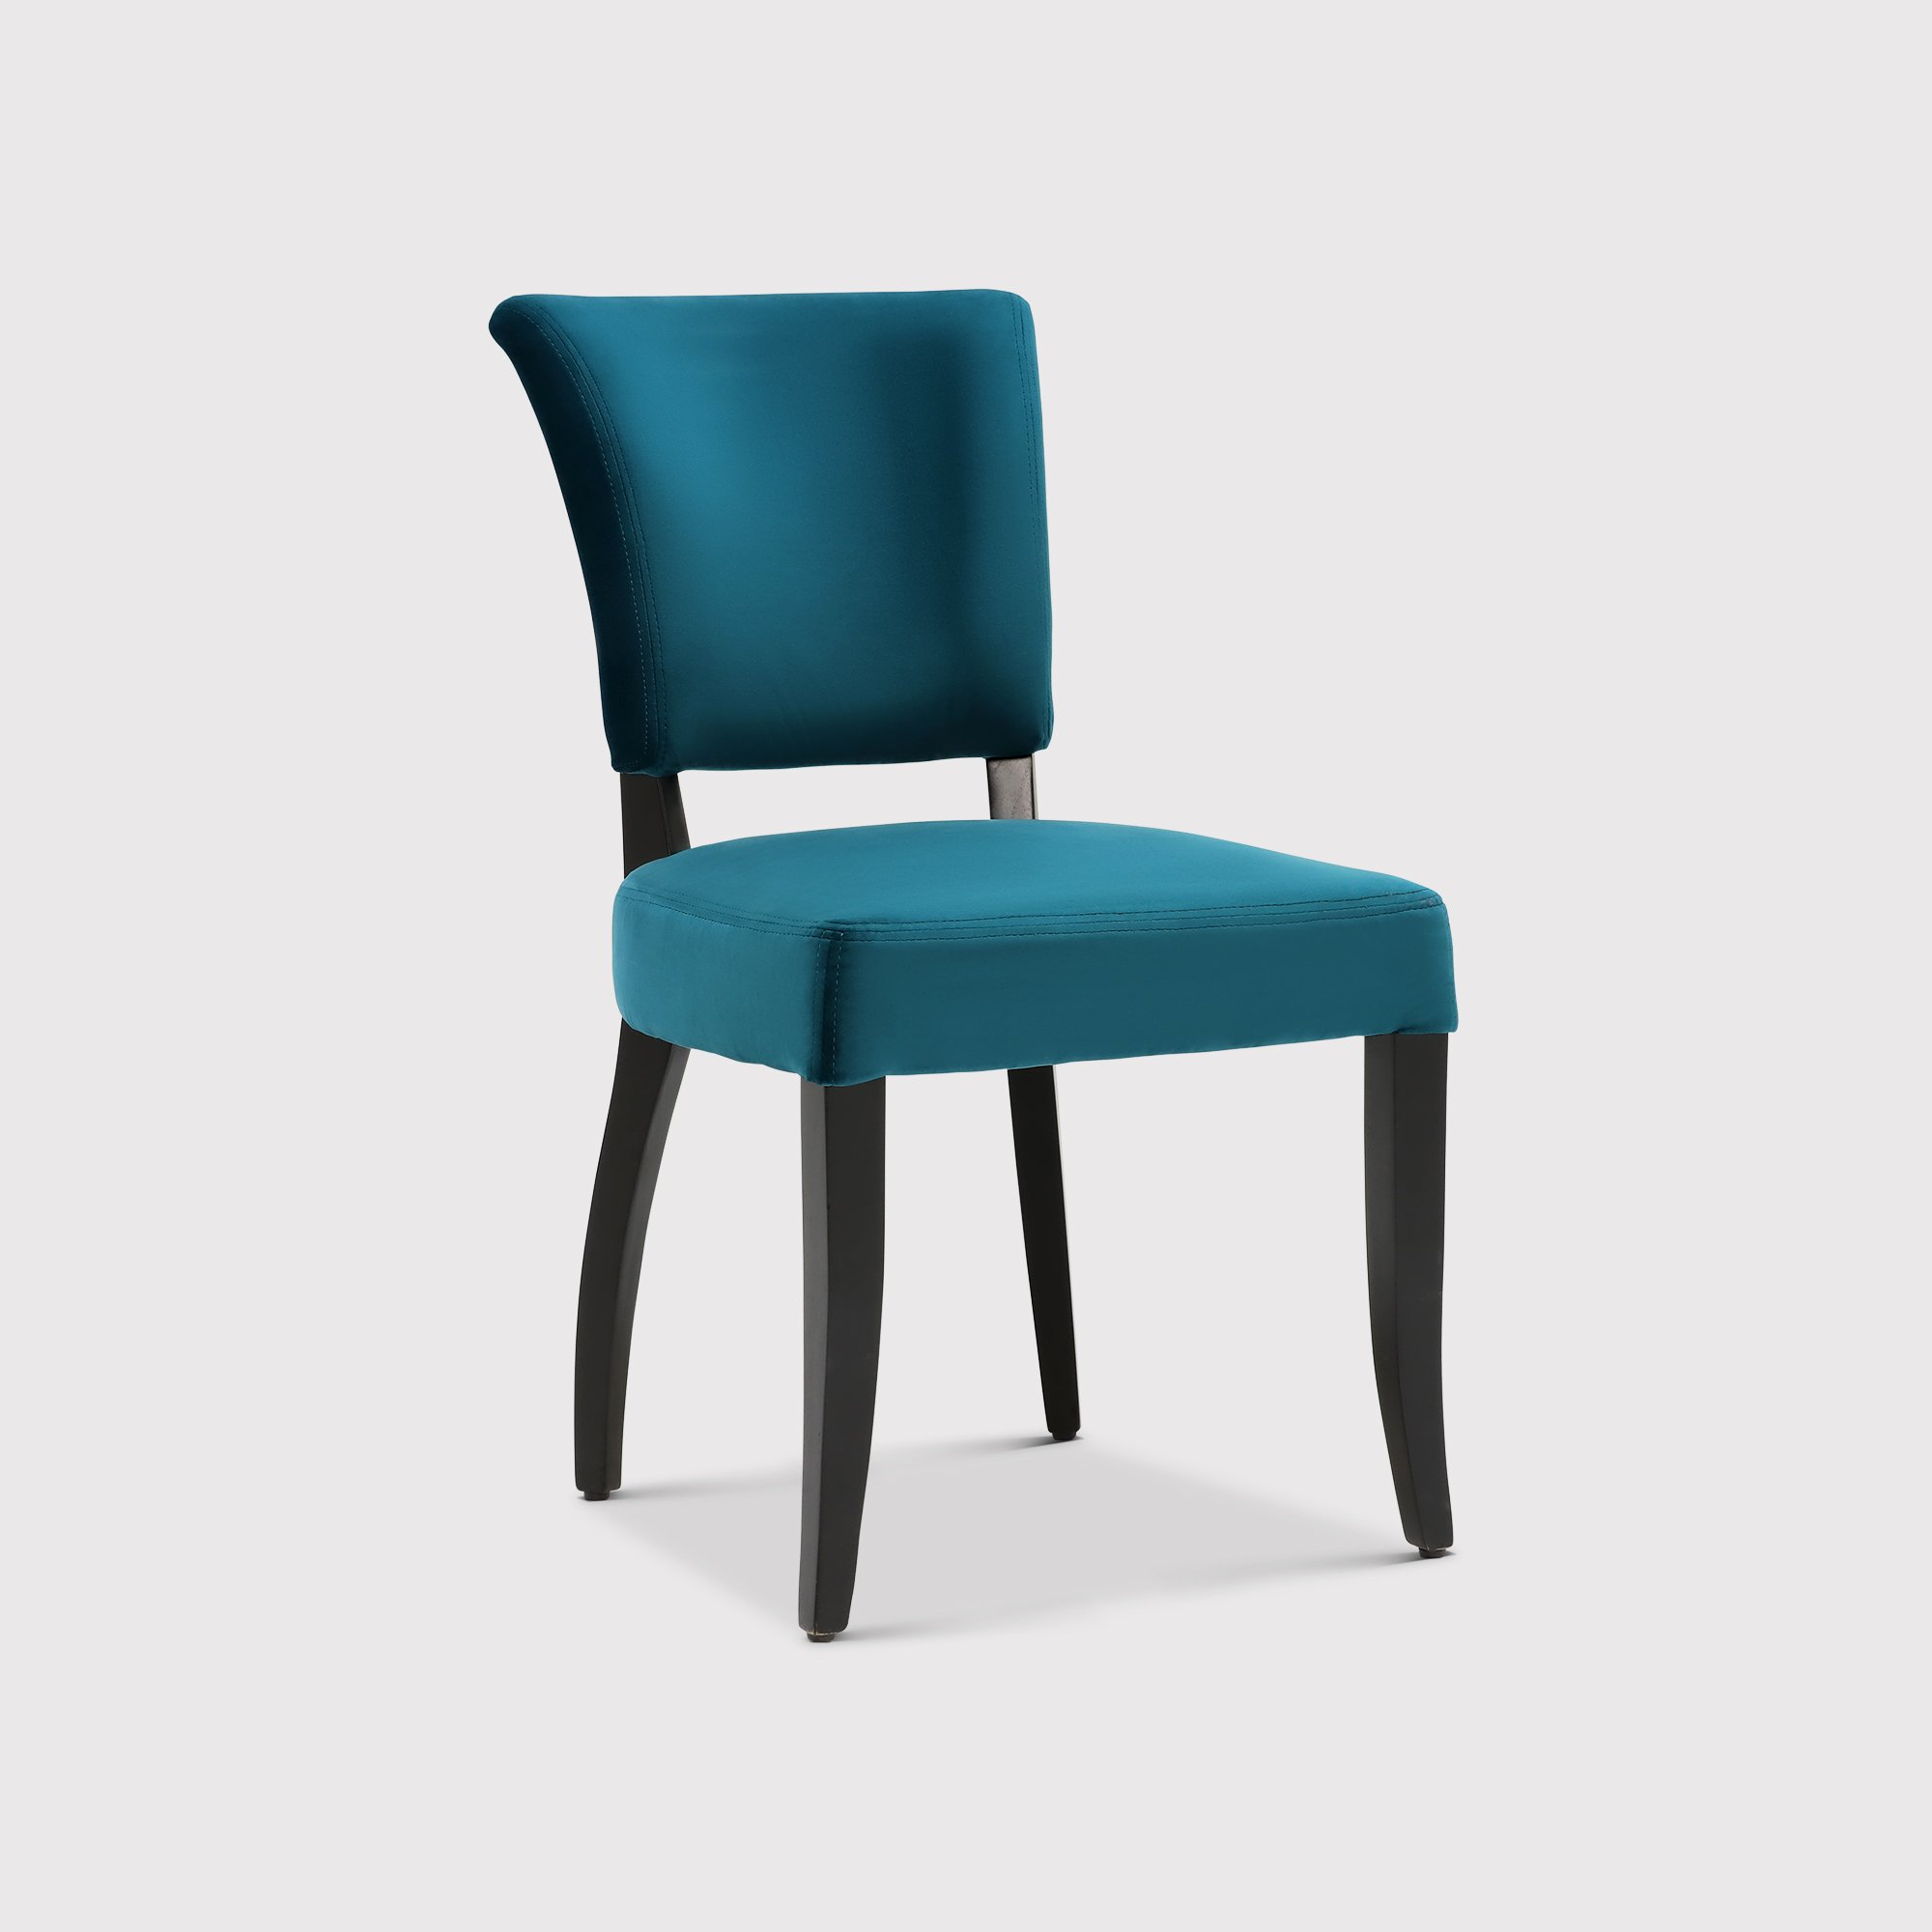 Timothy Oulton Mimi Dining Chair, Teal | Barker & Stonehouse